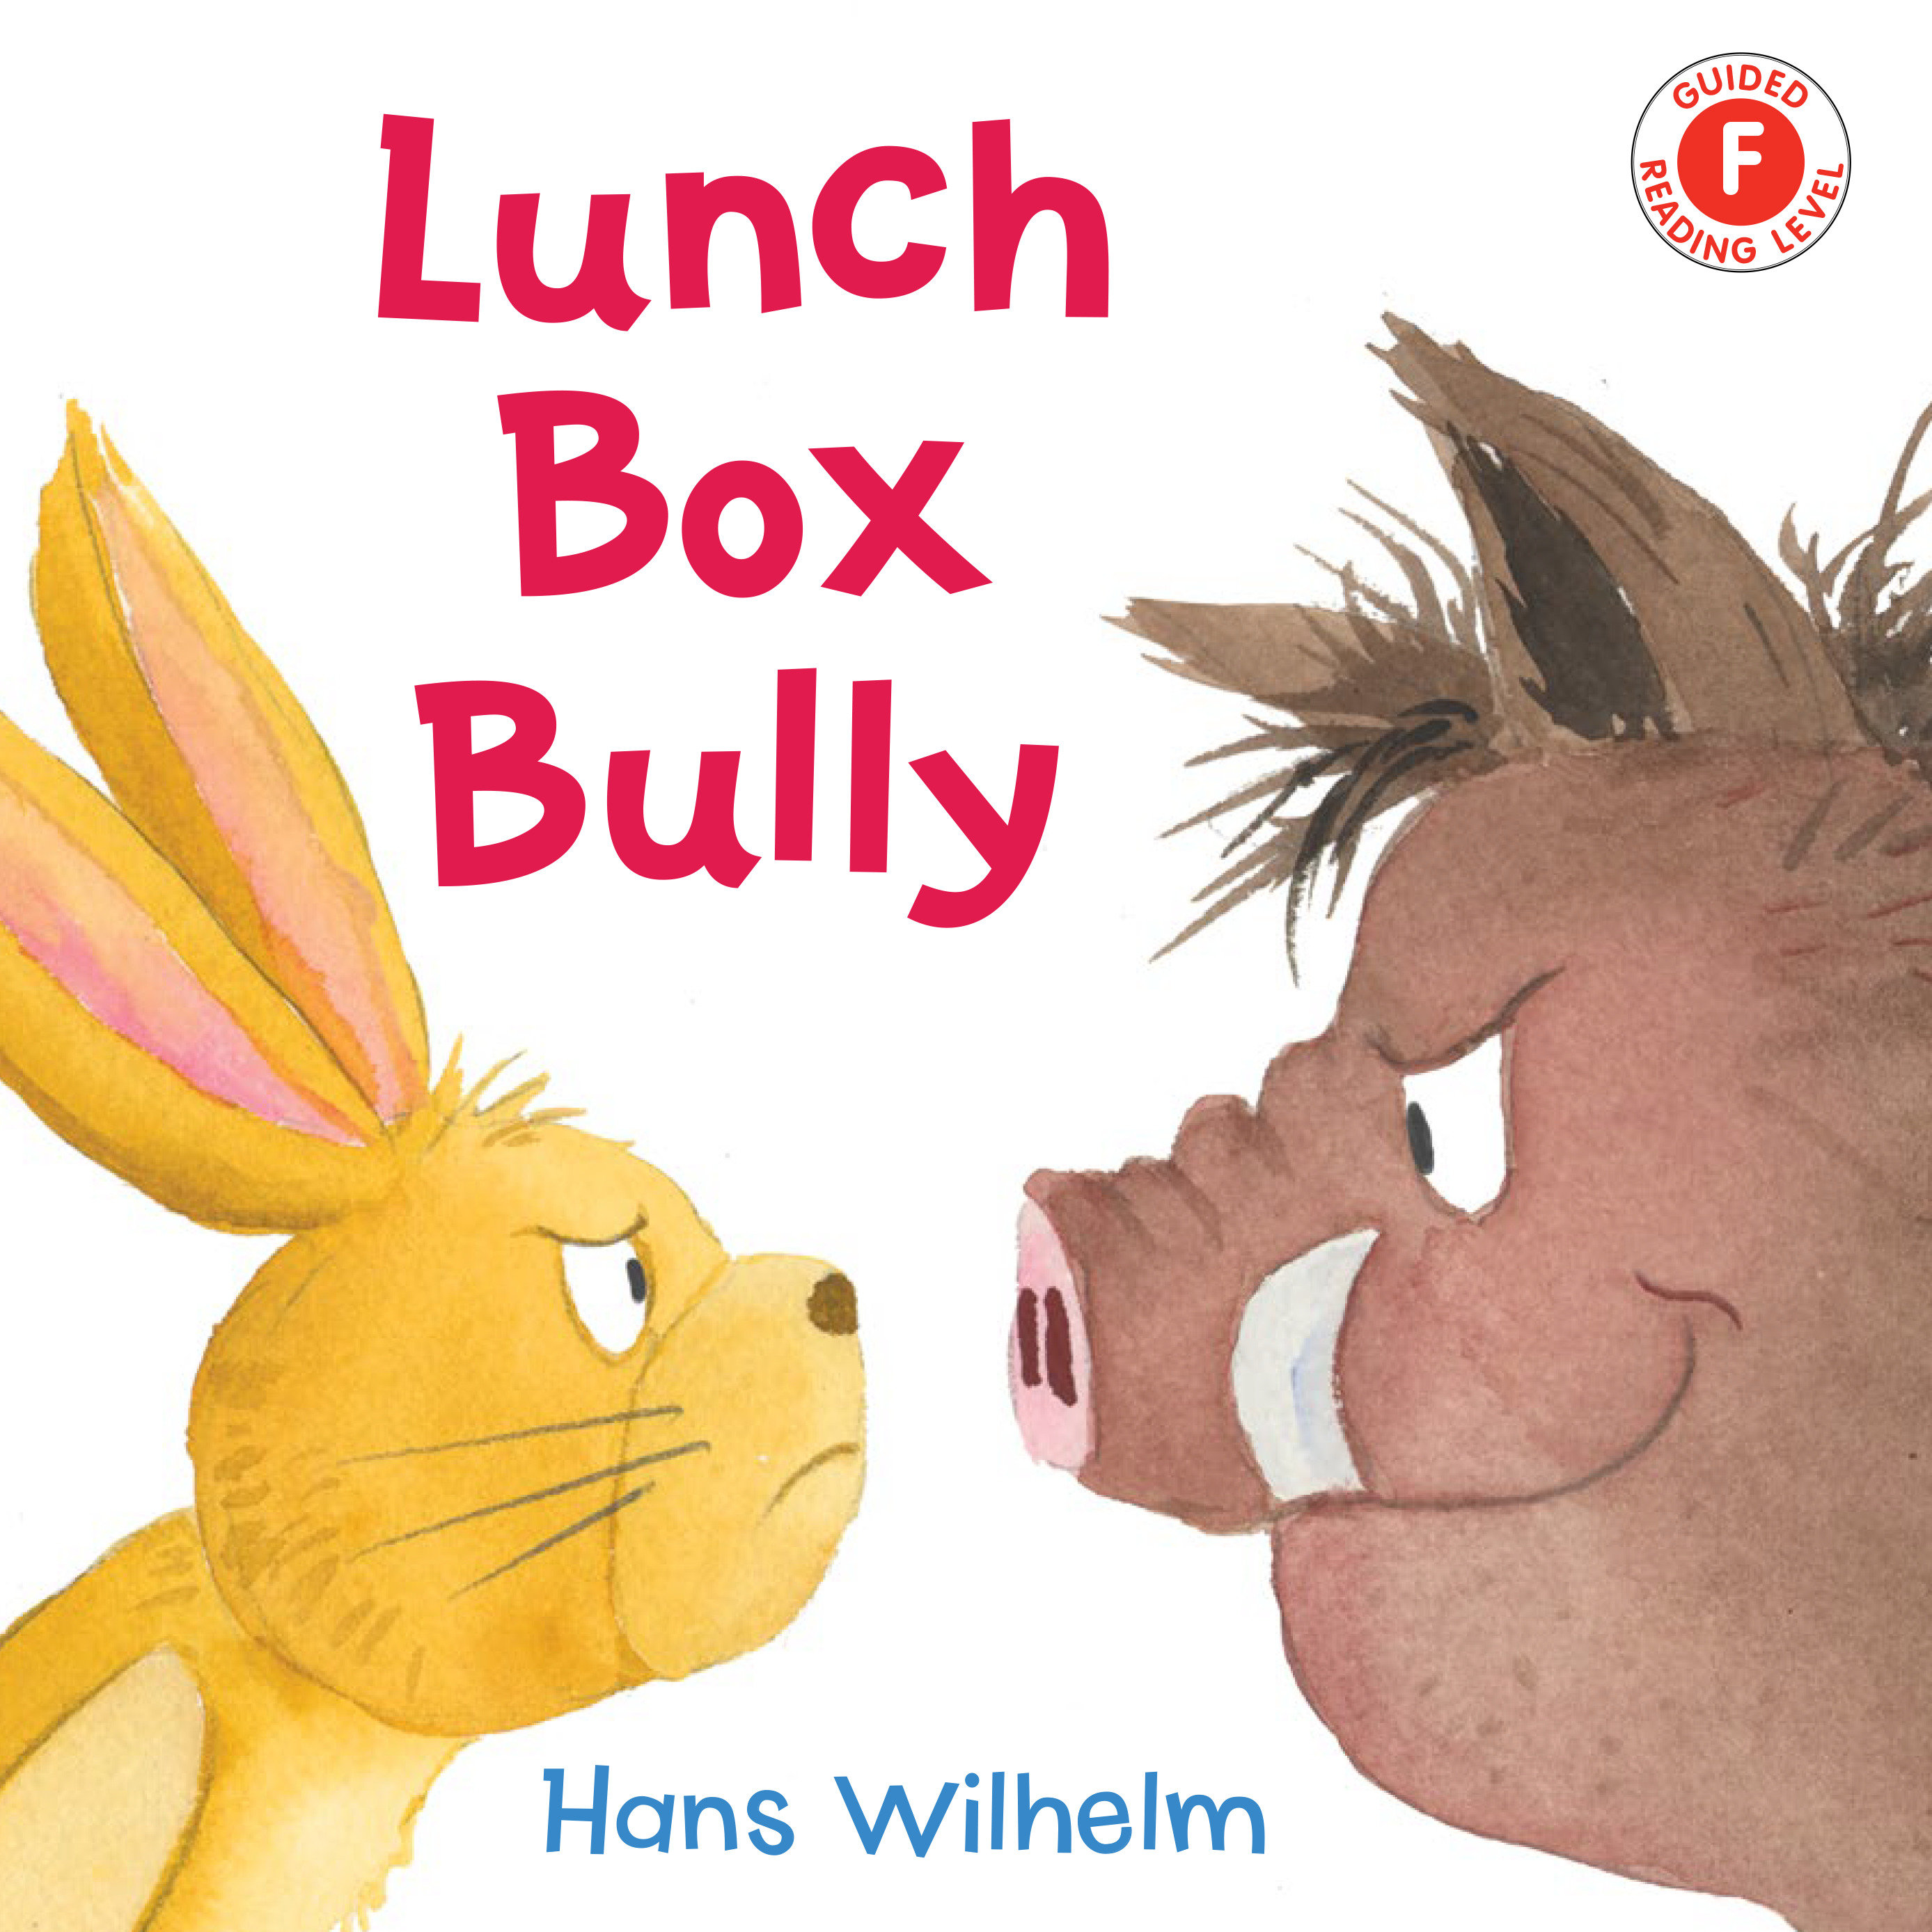 Lunch Box Bully (Hardcover Book)